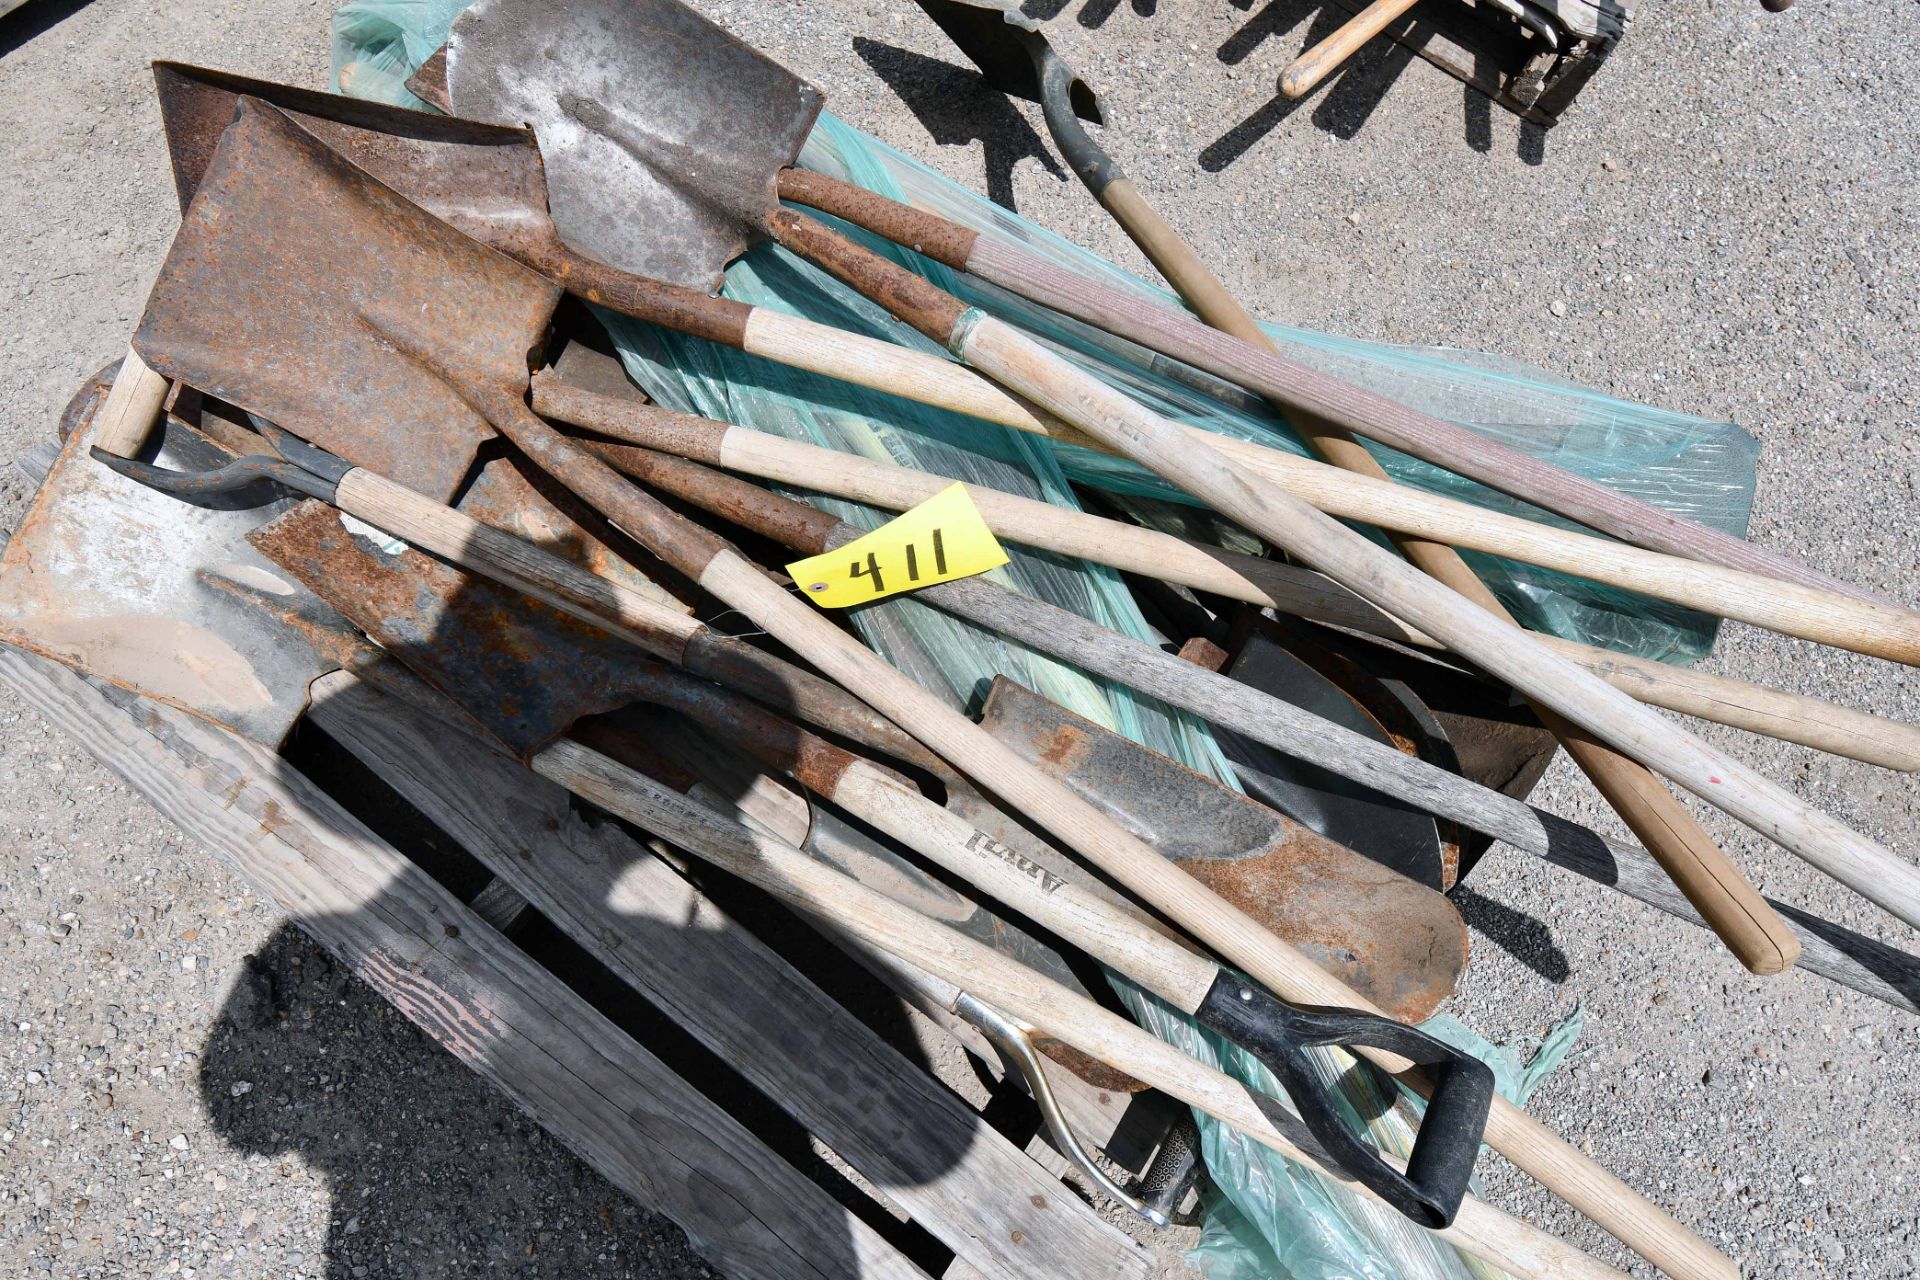 LOT OF SHOVELS (on one pallet) (Location: MDS Boring & Drilling, 11900 Hirsch Road, Houston, TX